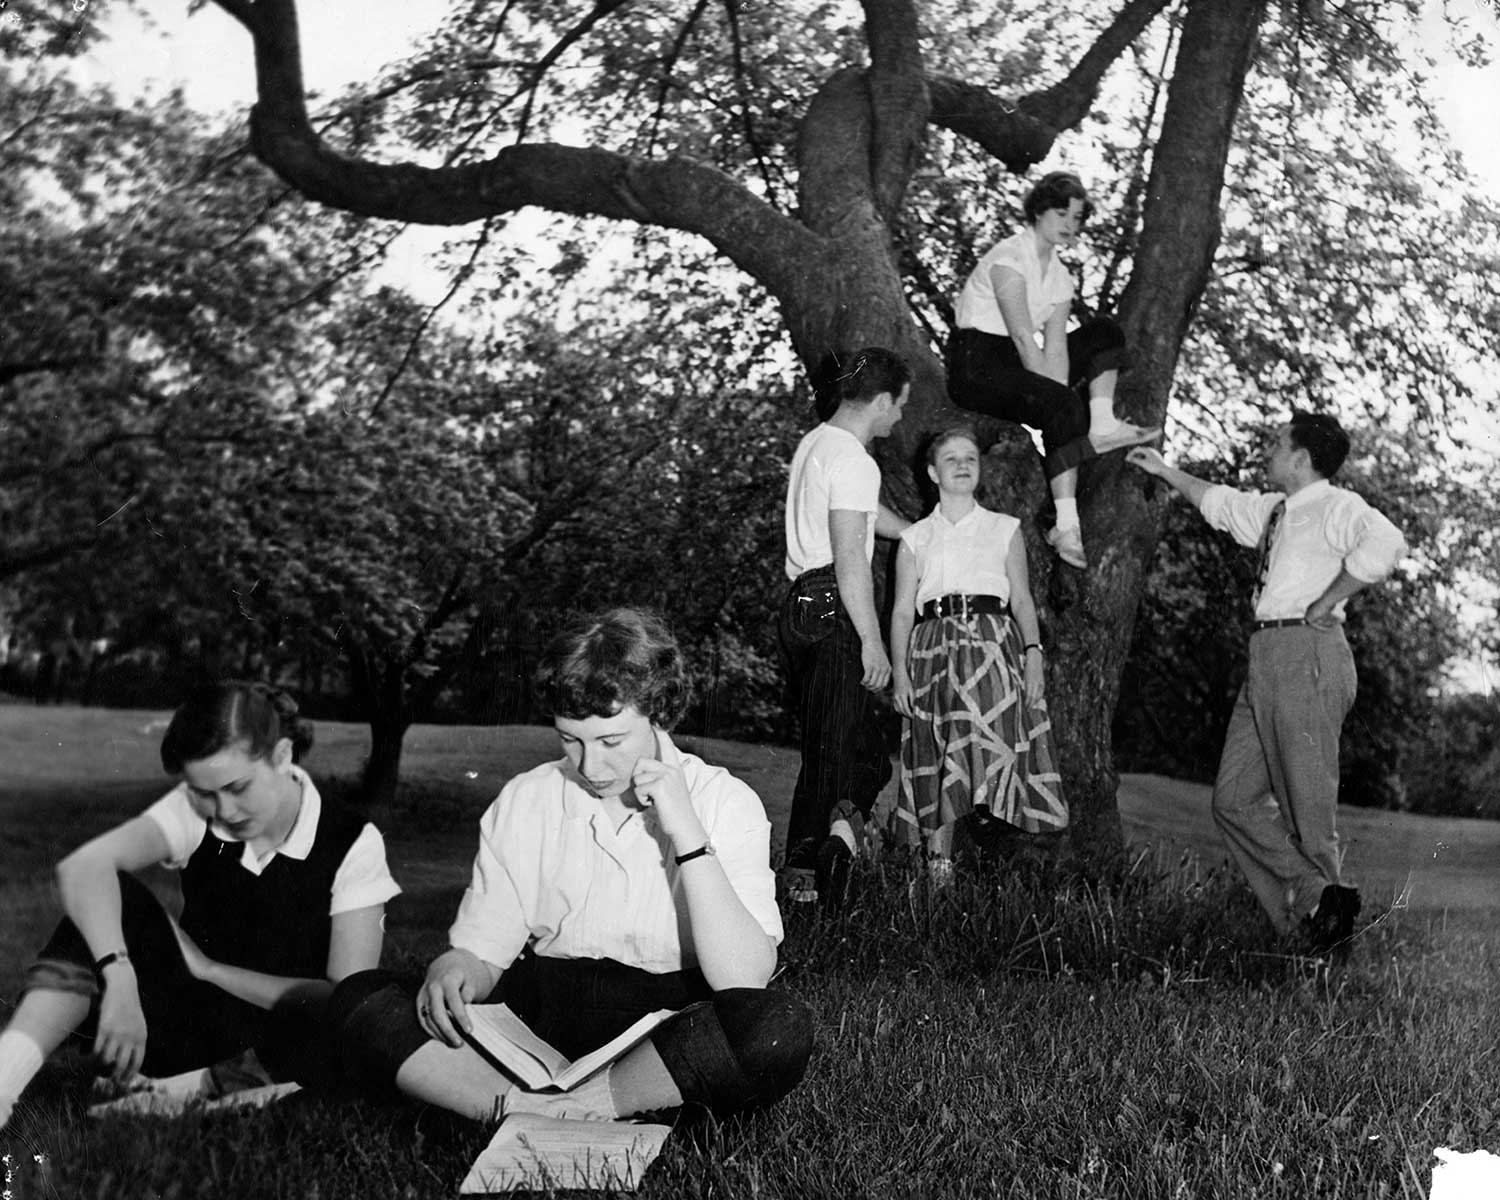 A group of students read and talk beneath a tree.